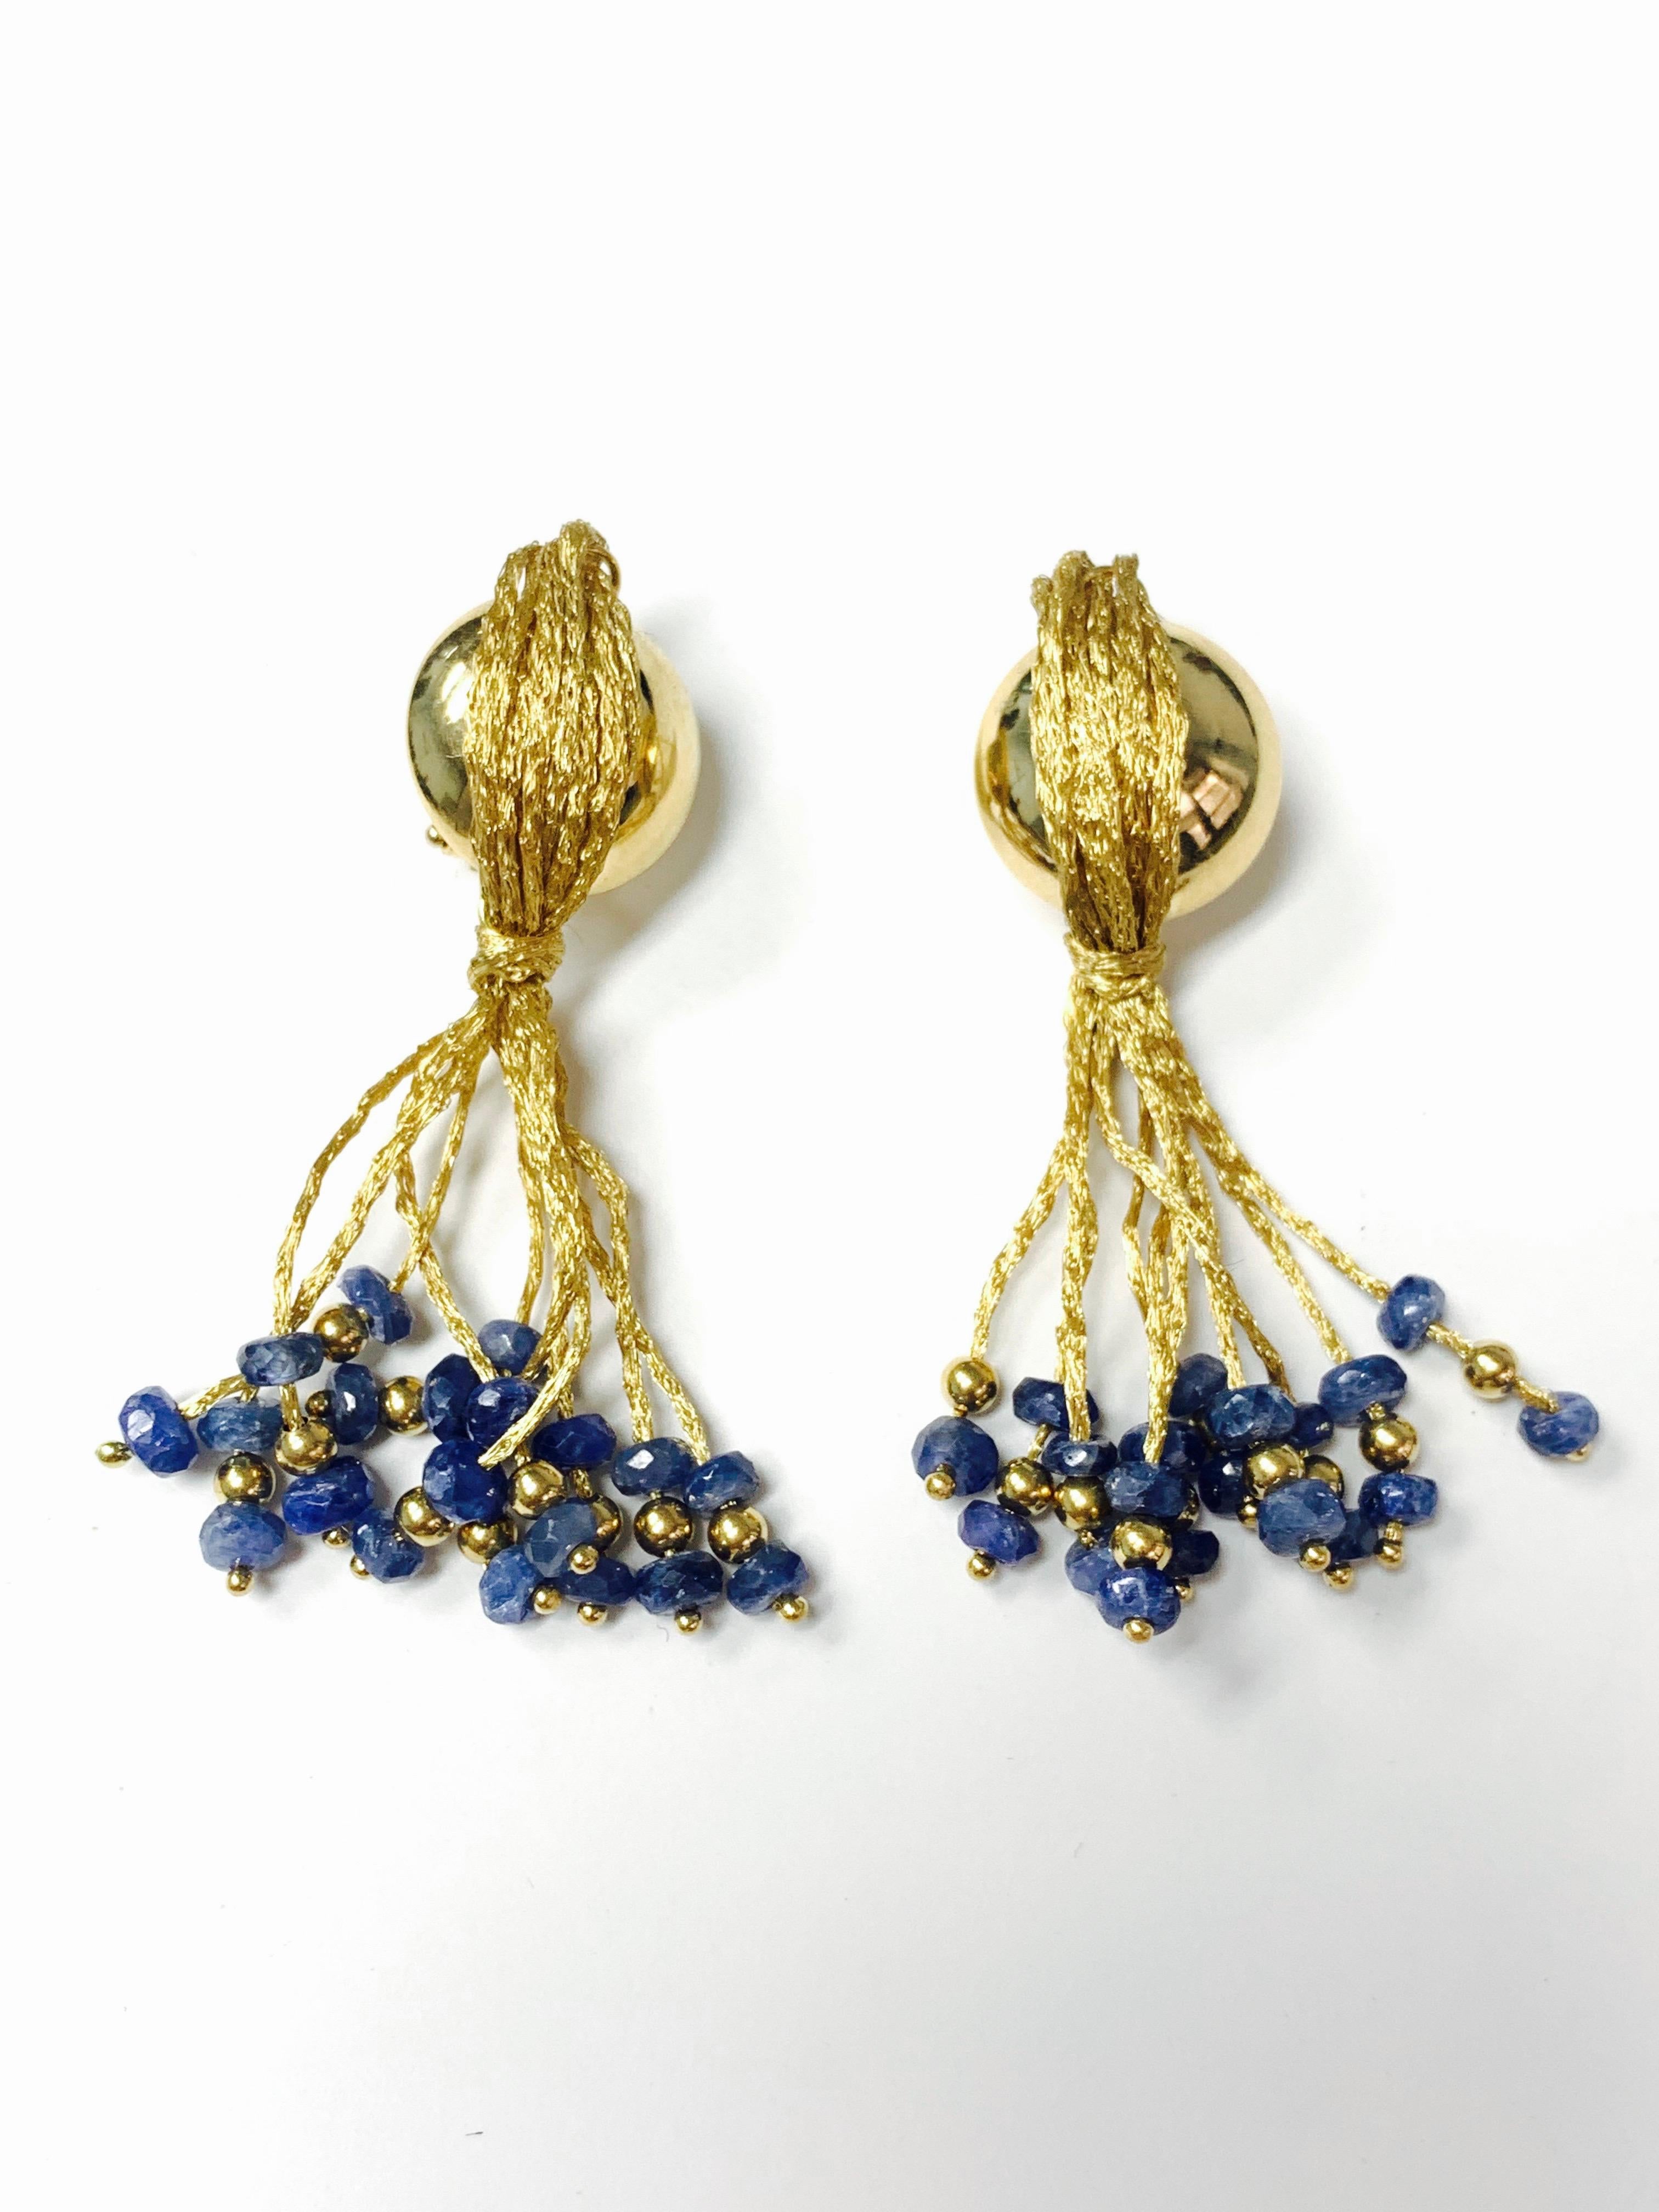 Contemporary Blue Sapphire Bead Earrings in 18 K Yellow Gold